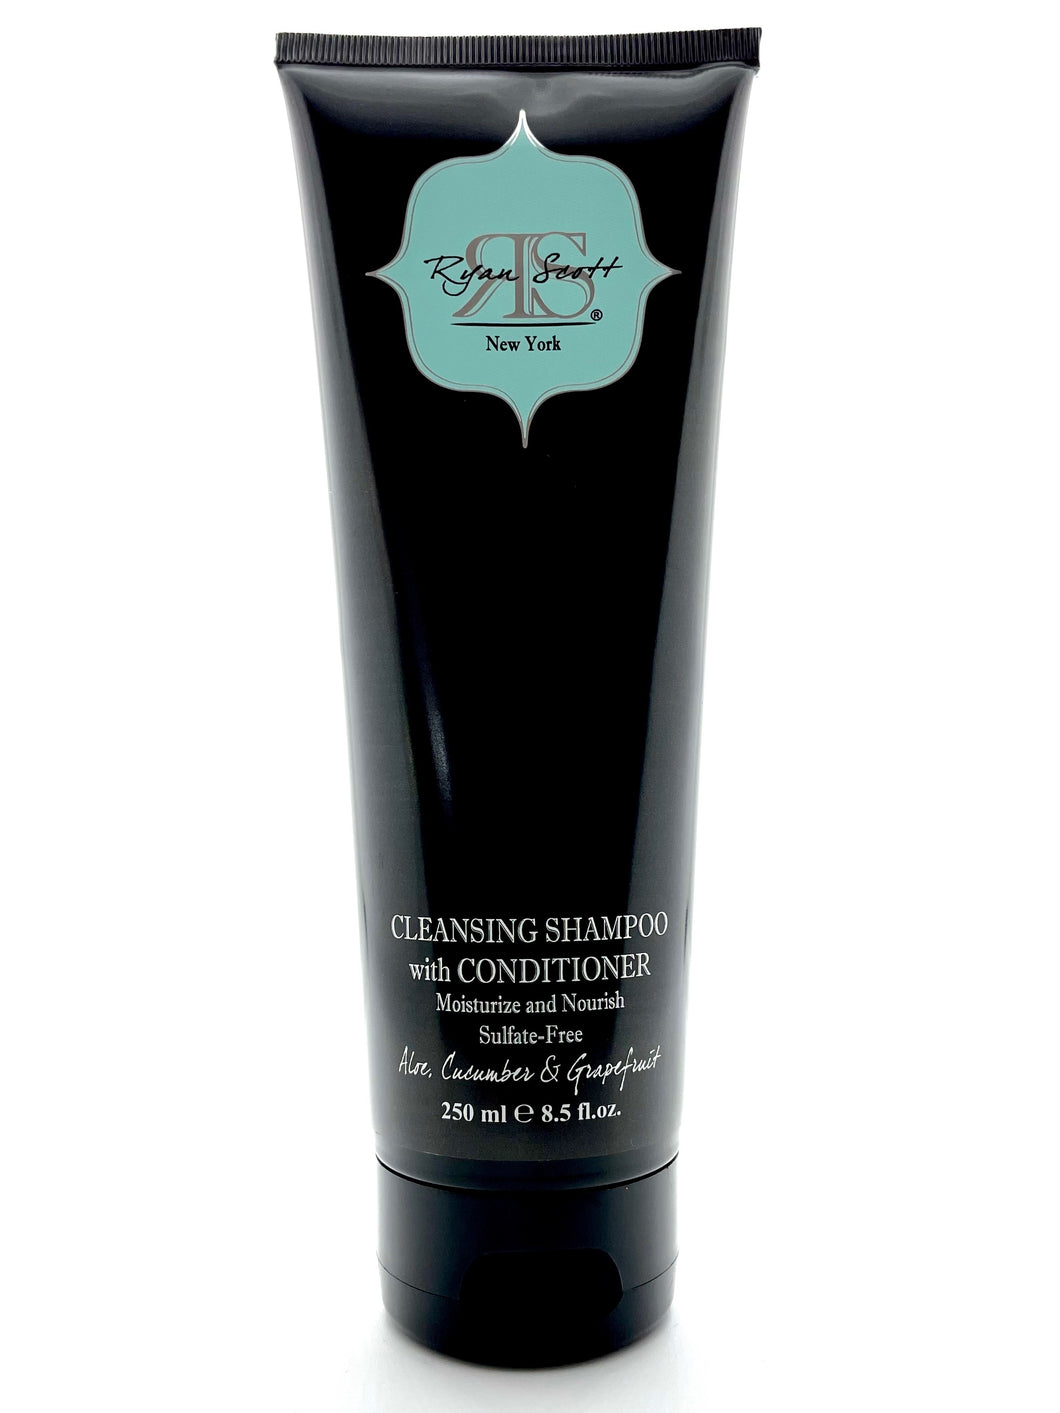 Cleansing Shampoo with Conditioner - Sulfate Free - Moisturize & Nourish 8.5oz